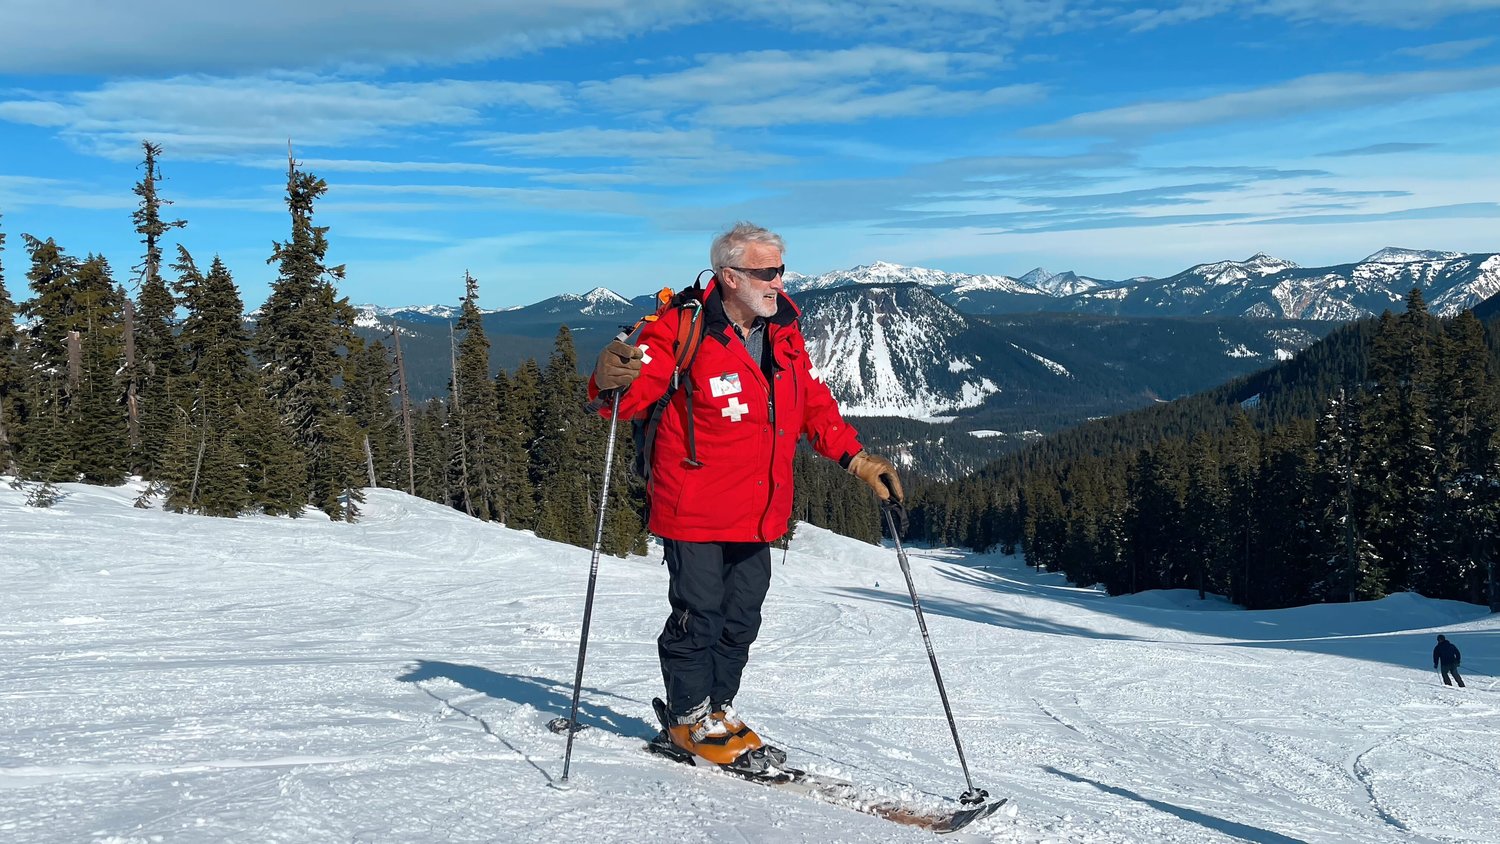 Michael Murphy, known on the slopes as “Murph,” patrols the front half of the mountain on skis checking on riders before continuing down the Cascade route Sunday at the White Pass Ski Resort.